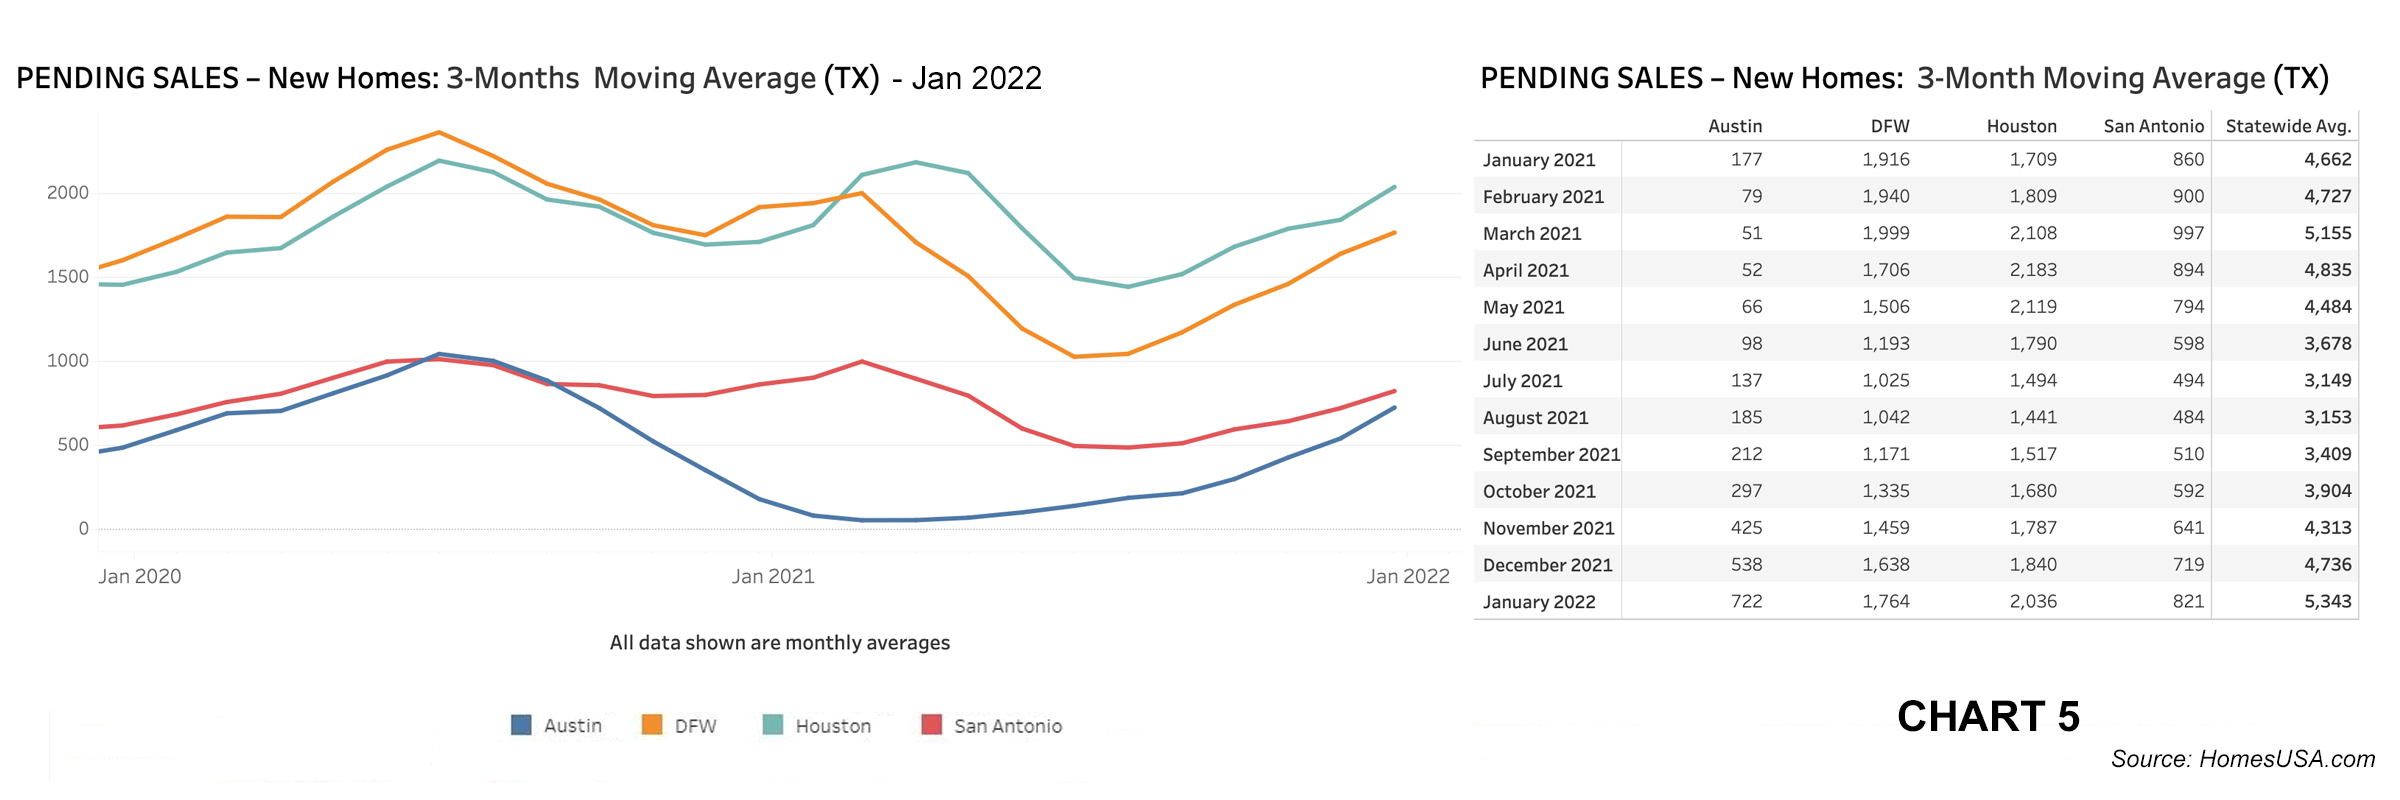 Chart 5: Texas Pending New Home Sales – January 2022